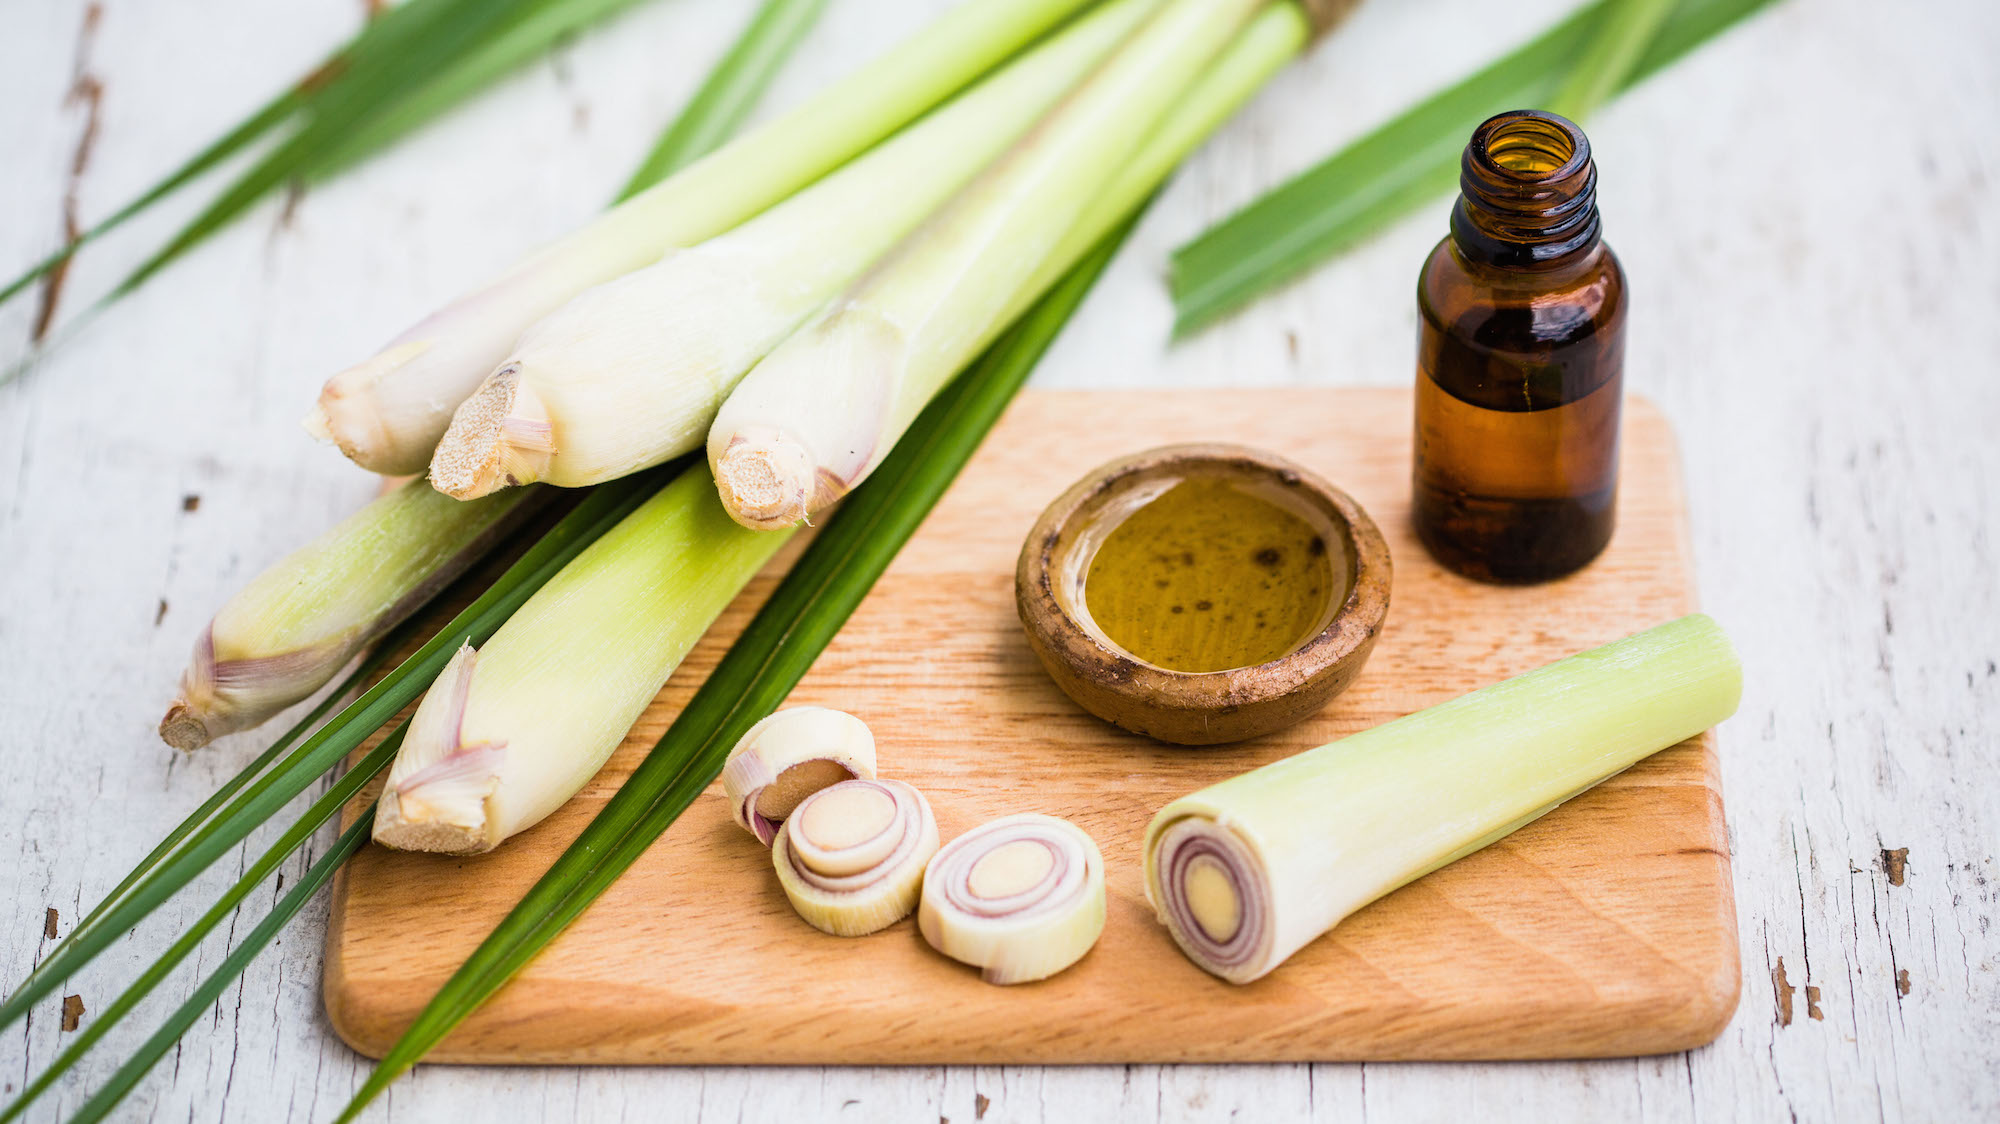 Lemon grass benefits: A wonder herb good for skin & more | Marie Claire UK